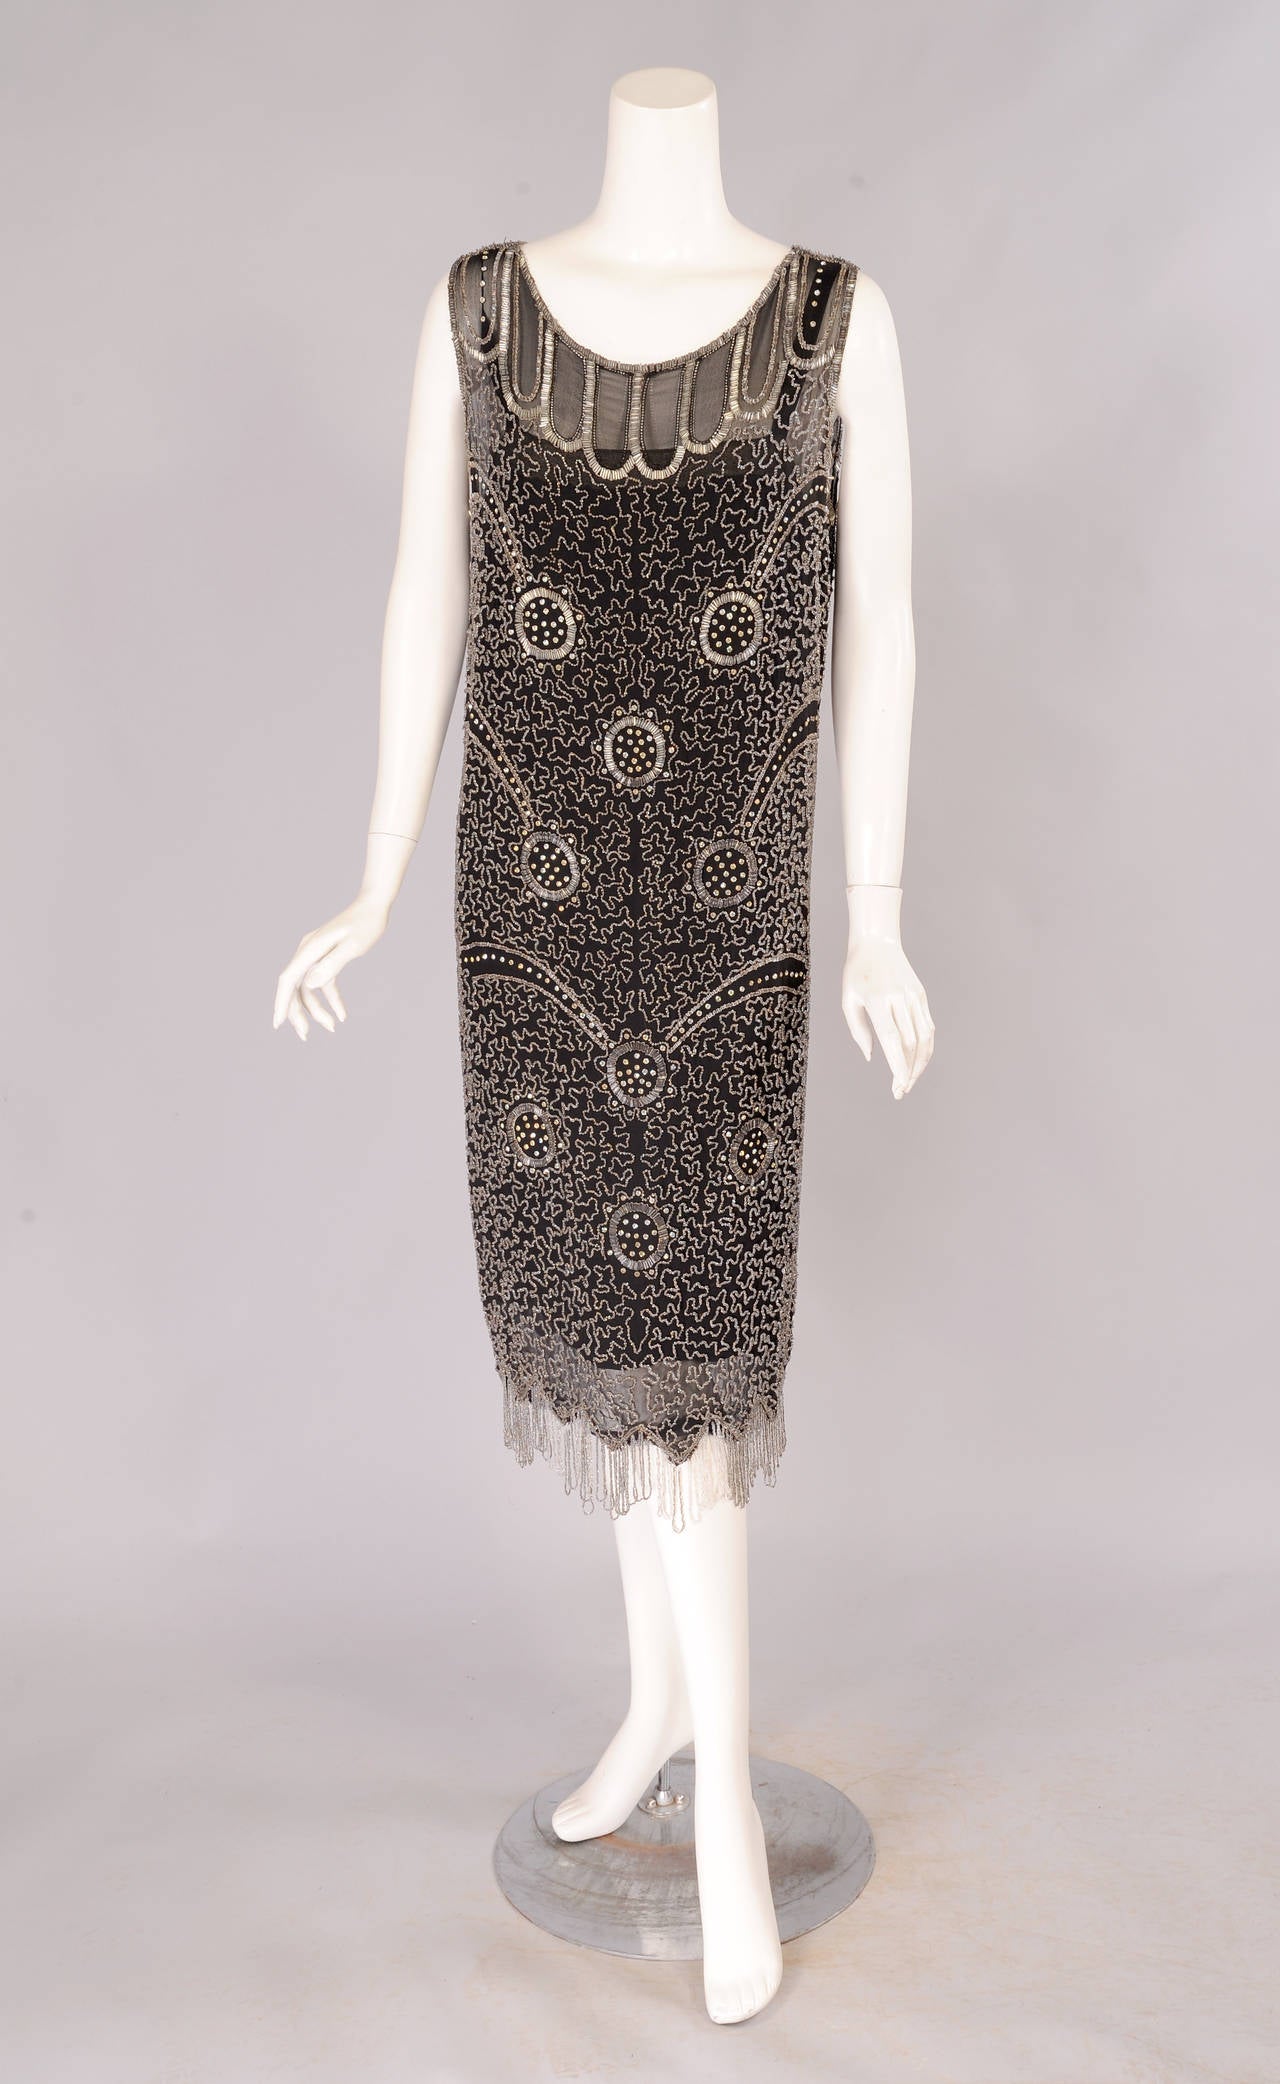 Black silk is hand beaded with a bugle beaded design at the neckline and a vermicelli pattern in caviar beads on the body of the dress. This is further embellished with prong set rhinestones in circular motifs. The dress has a looped beaded fringe